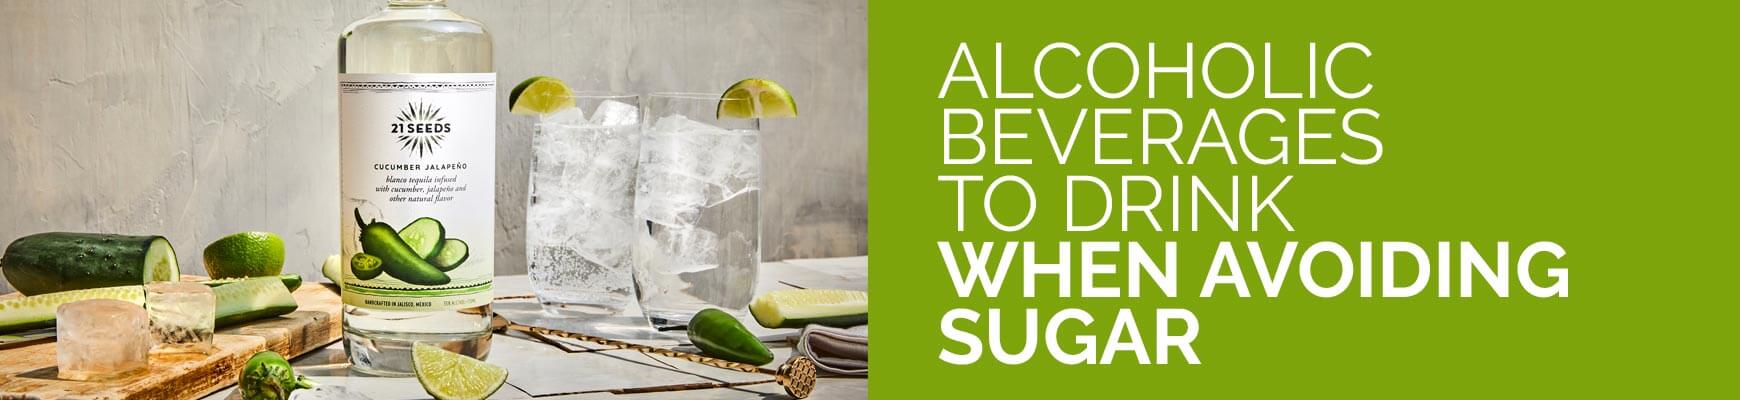 Alcoholic Beverages to Drink When Avoiding Sugar